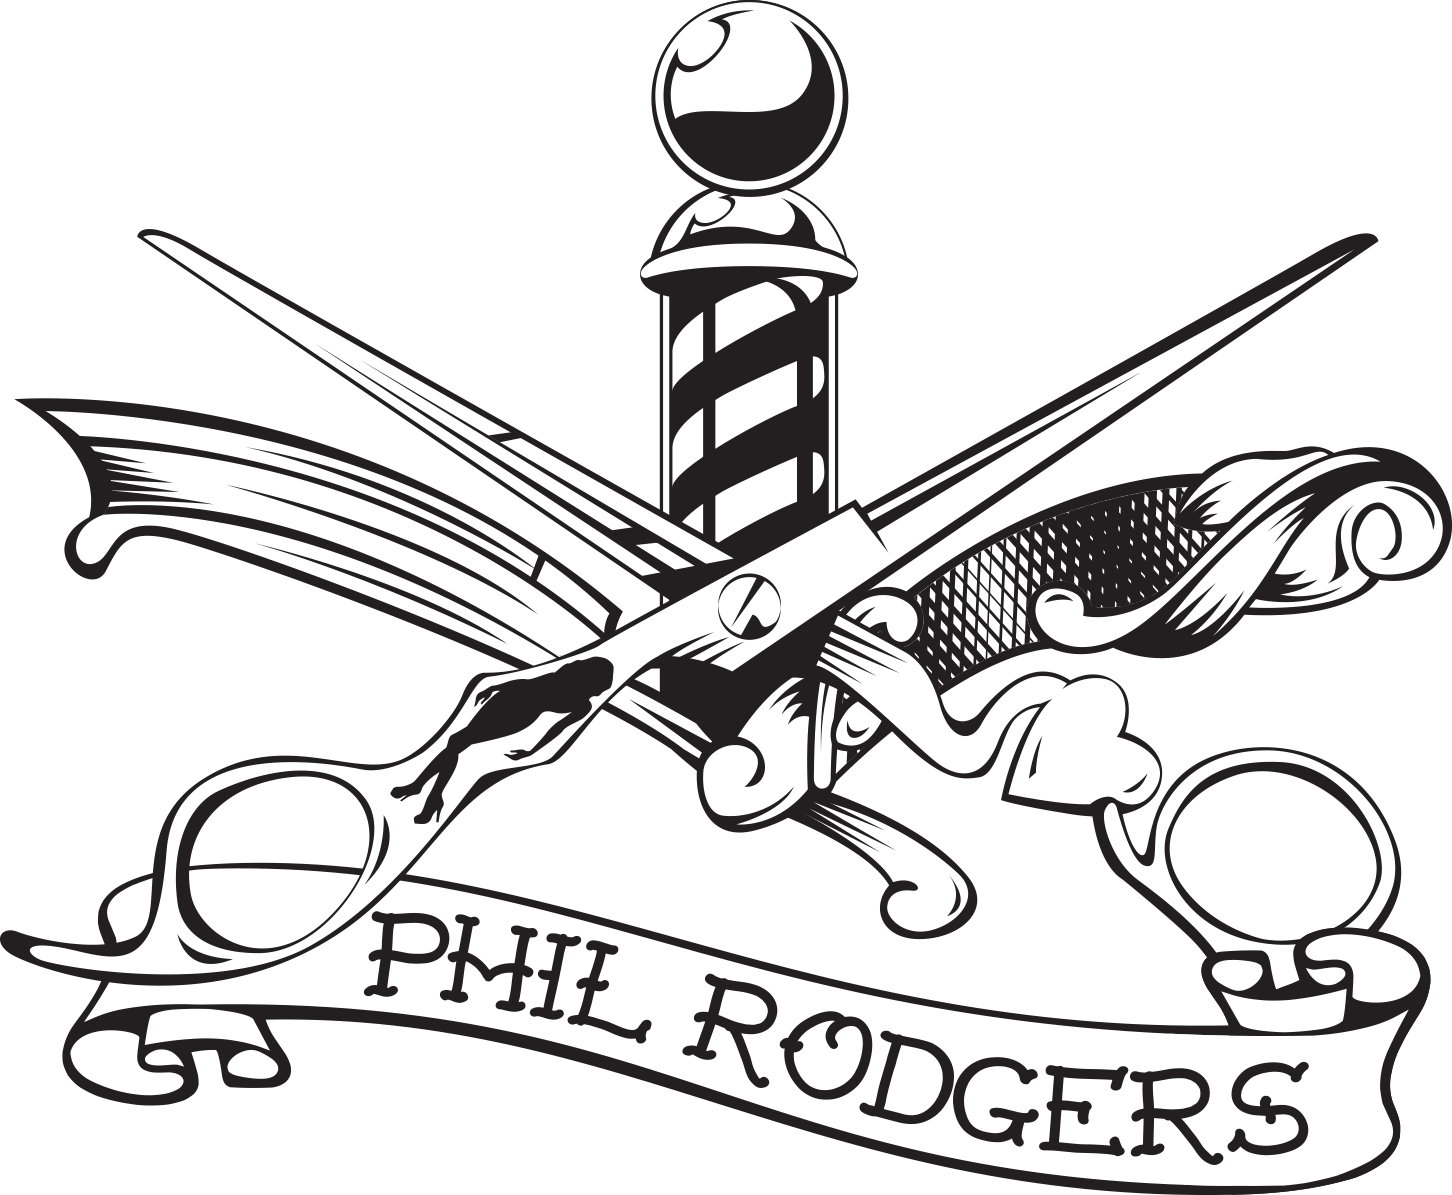 Phil Rodgers Hairdressing